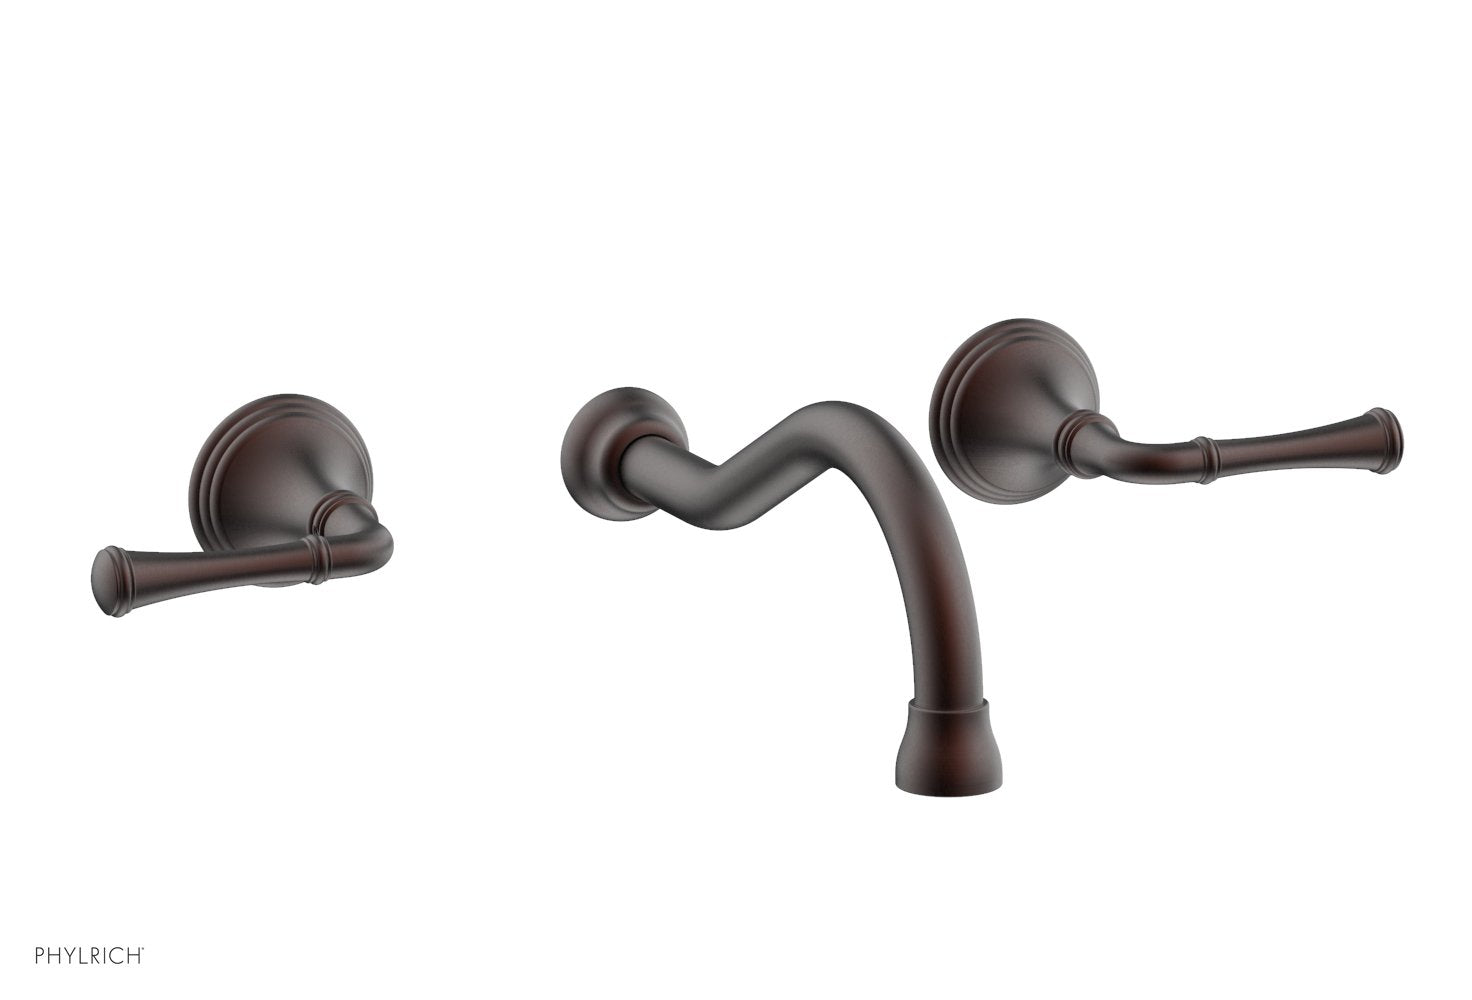 Phylrich 3RING Wall Lavatory Set - Straight Lever Handles